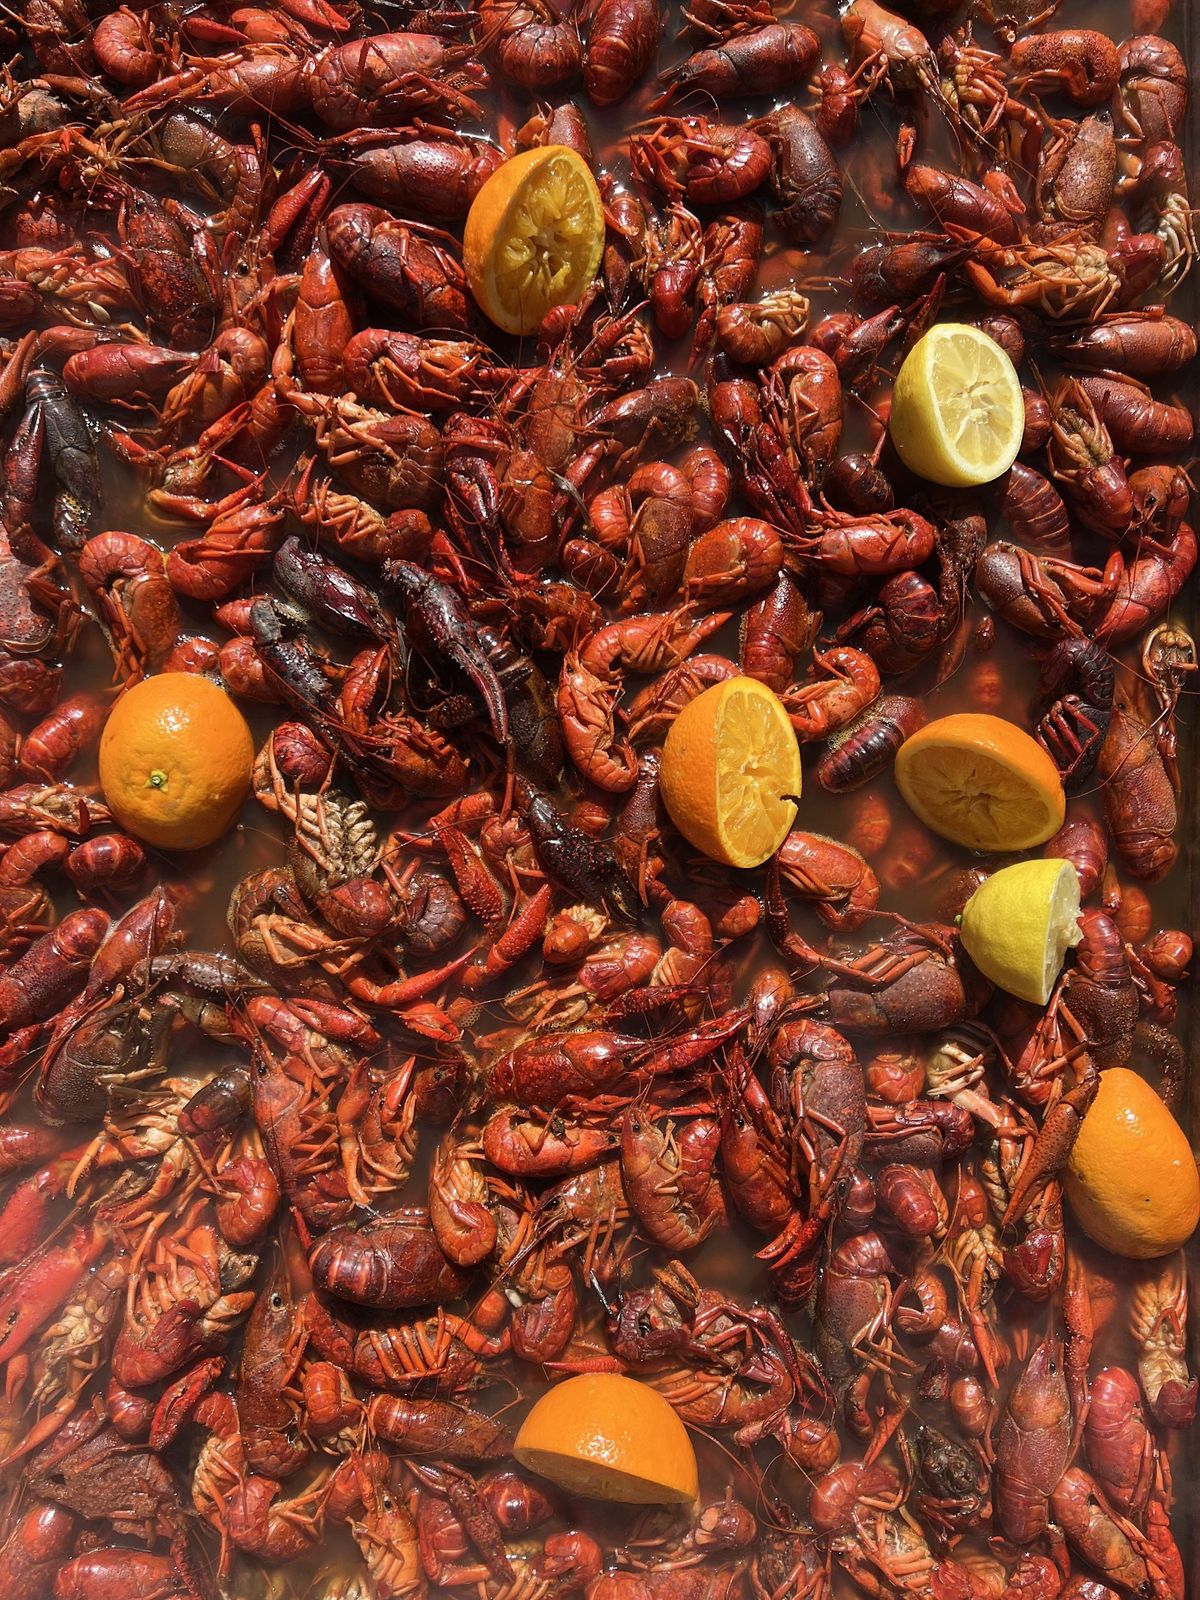 Stoney's Bar and Grill 13th Annual Crawfish Boil